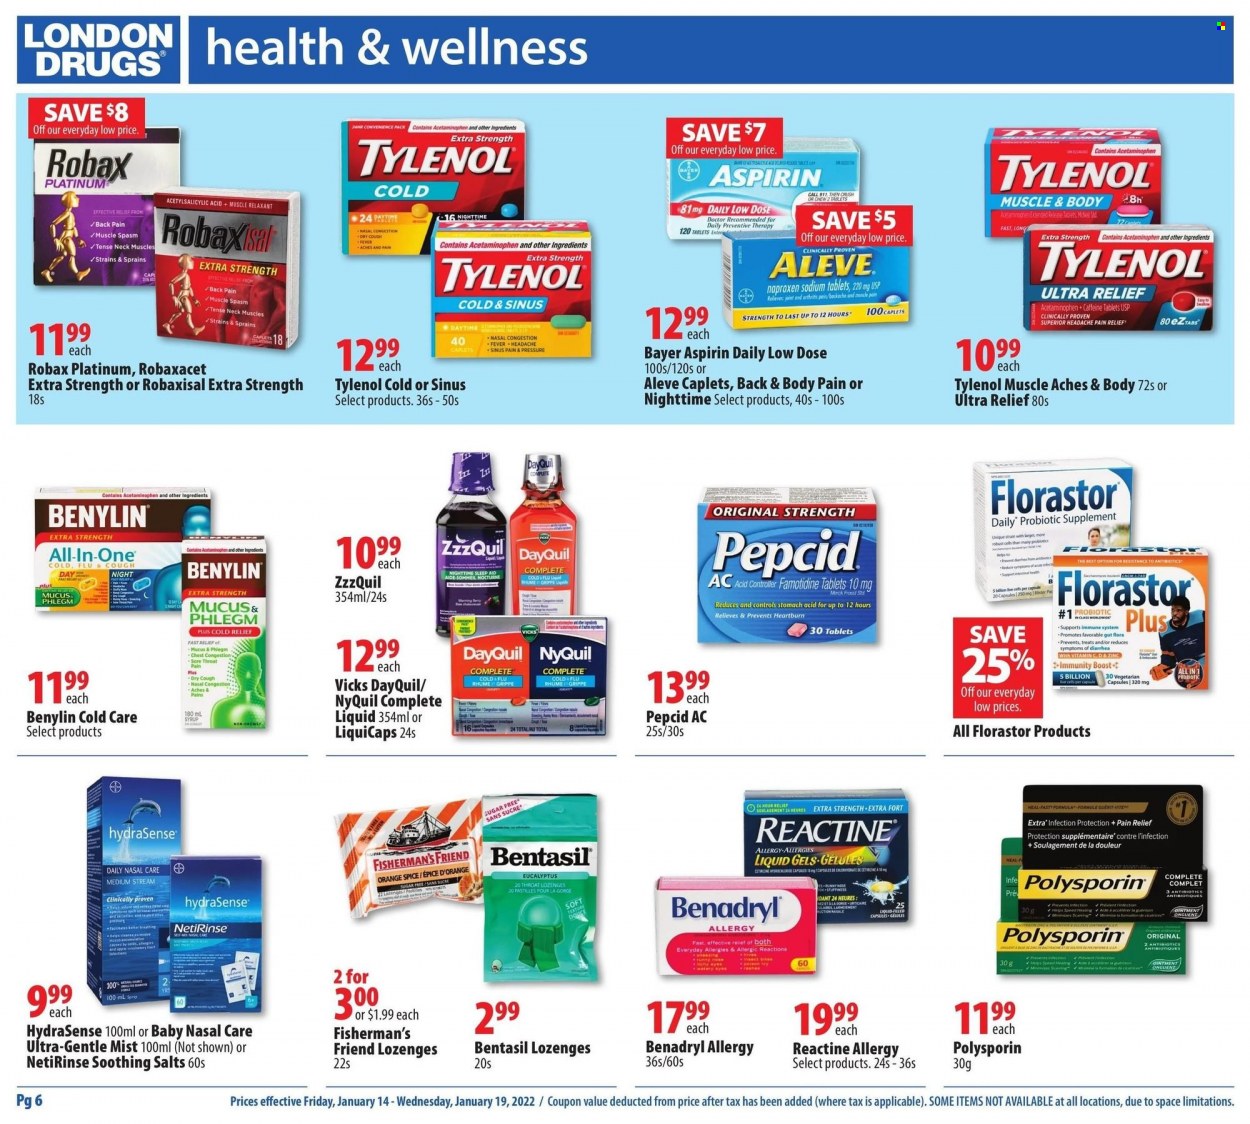 thumbnail - London Drugs Flyer - January 14, 2022 - January 19, 2022 - Sales products - spice, syrup, Boost, Vicks, pain relief, Aleve, DayQuil, Cold & Flu, Tylenol, ZzzQuil, probiotics, Pepcid, NyQuil, Low Dose, aspirin, Bayer, Benylin. Page 6.